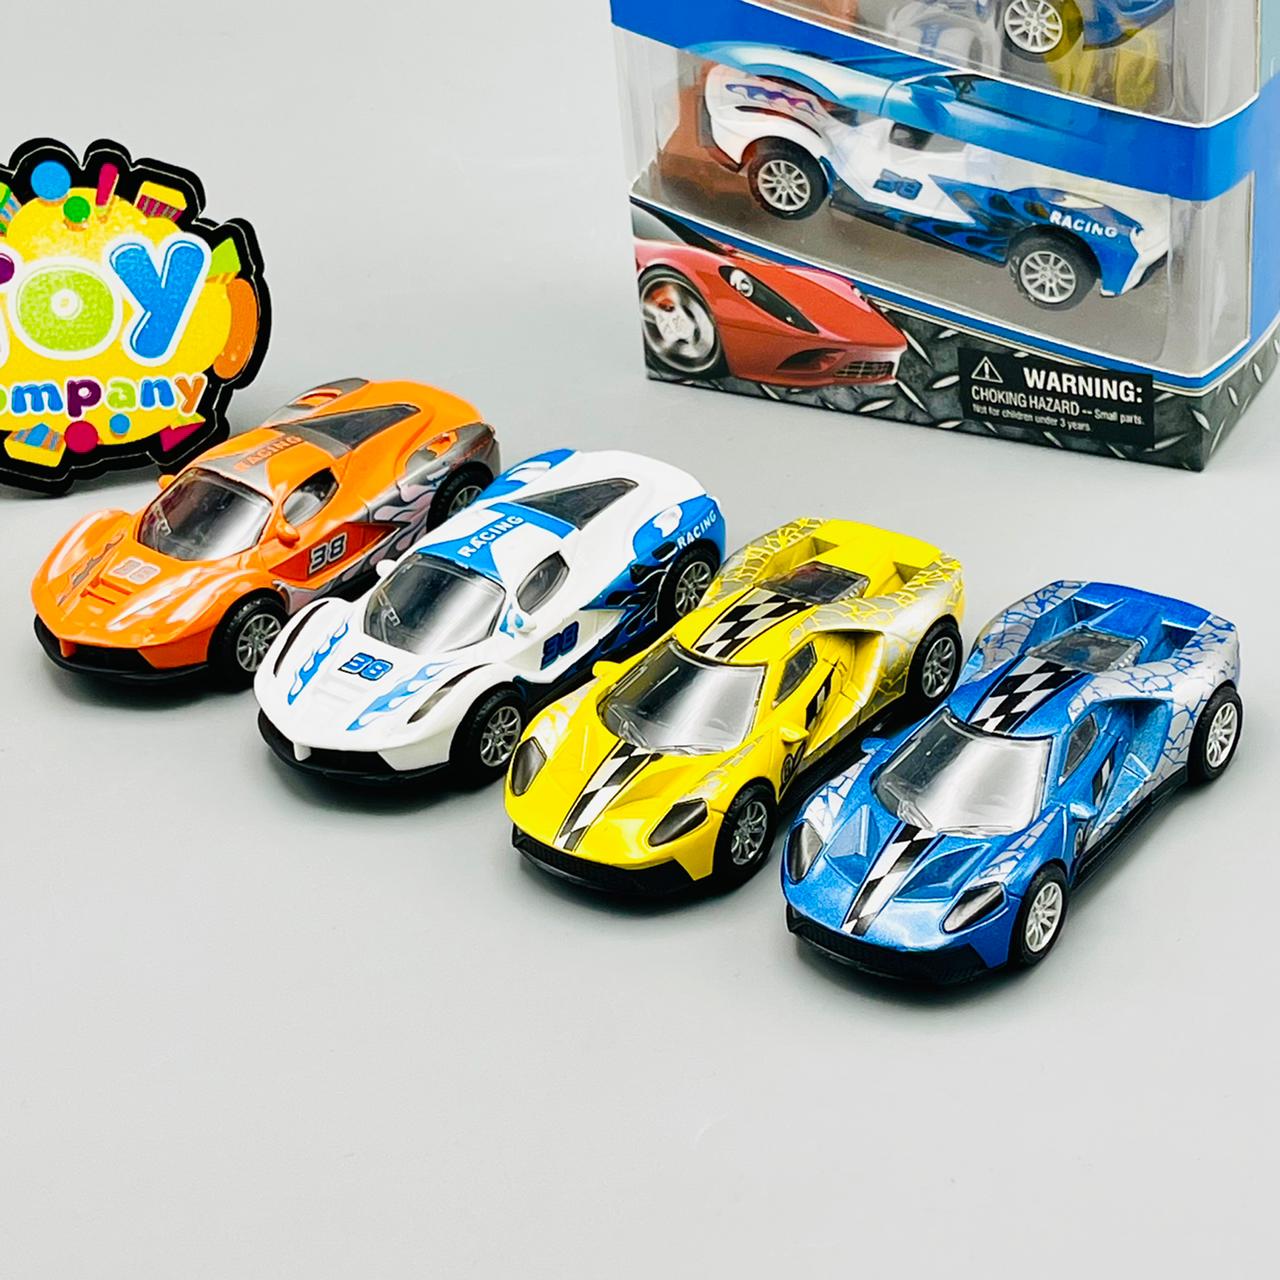 Diecast 1:43 Scale Pack of 4 Metal Cars